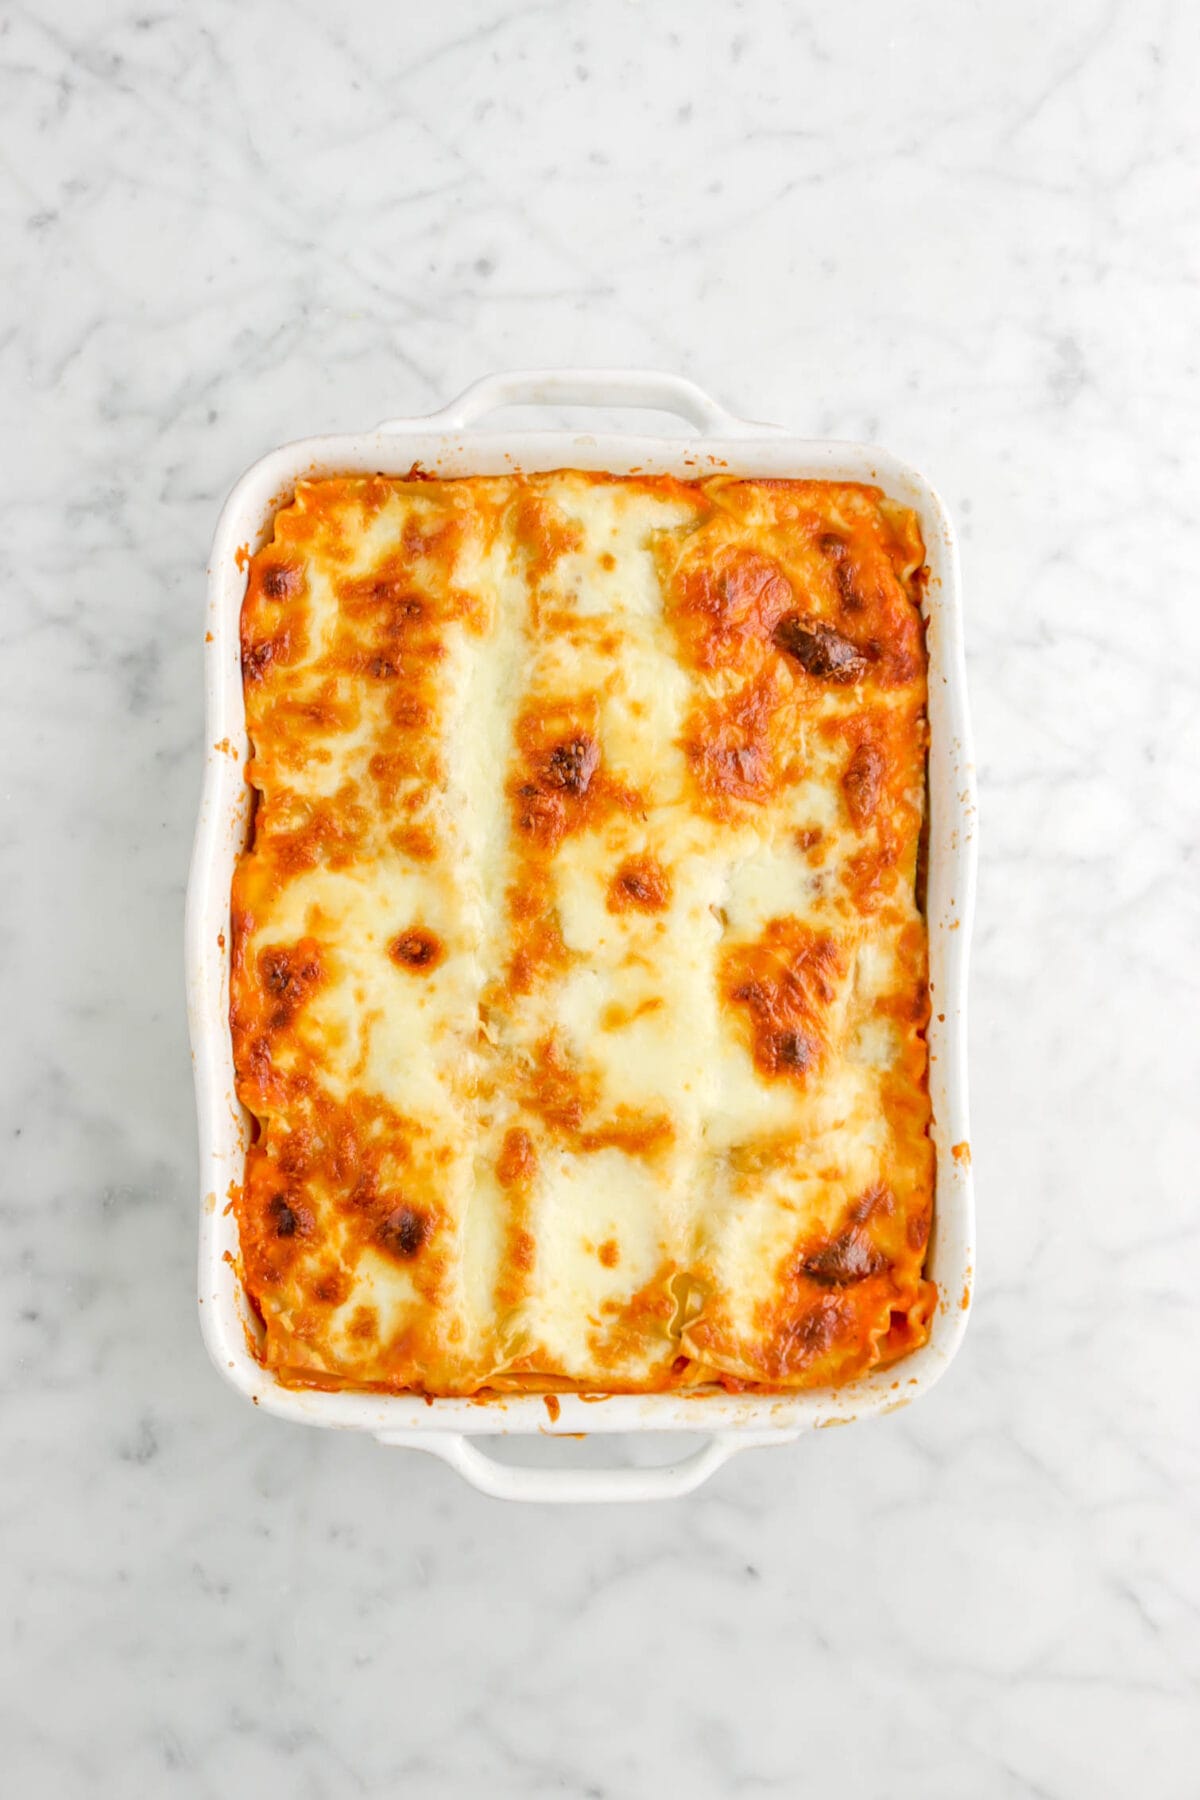 baked lasagna on marble surface